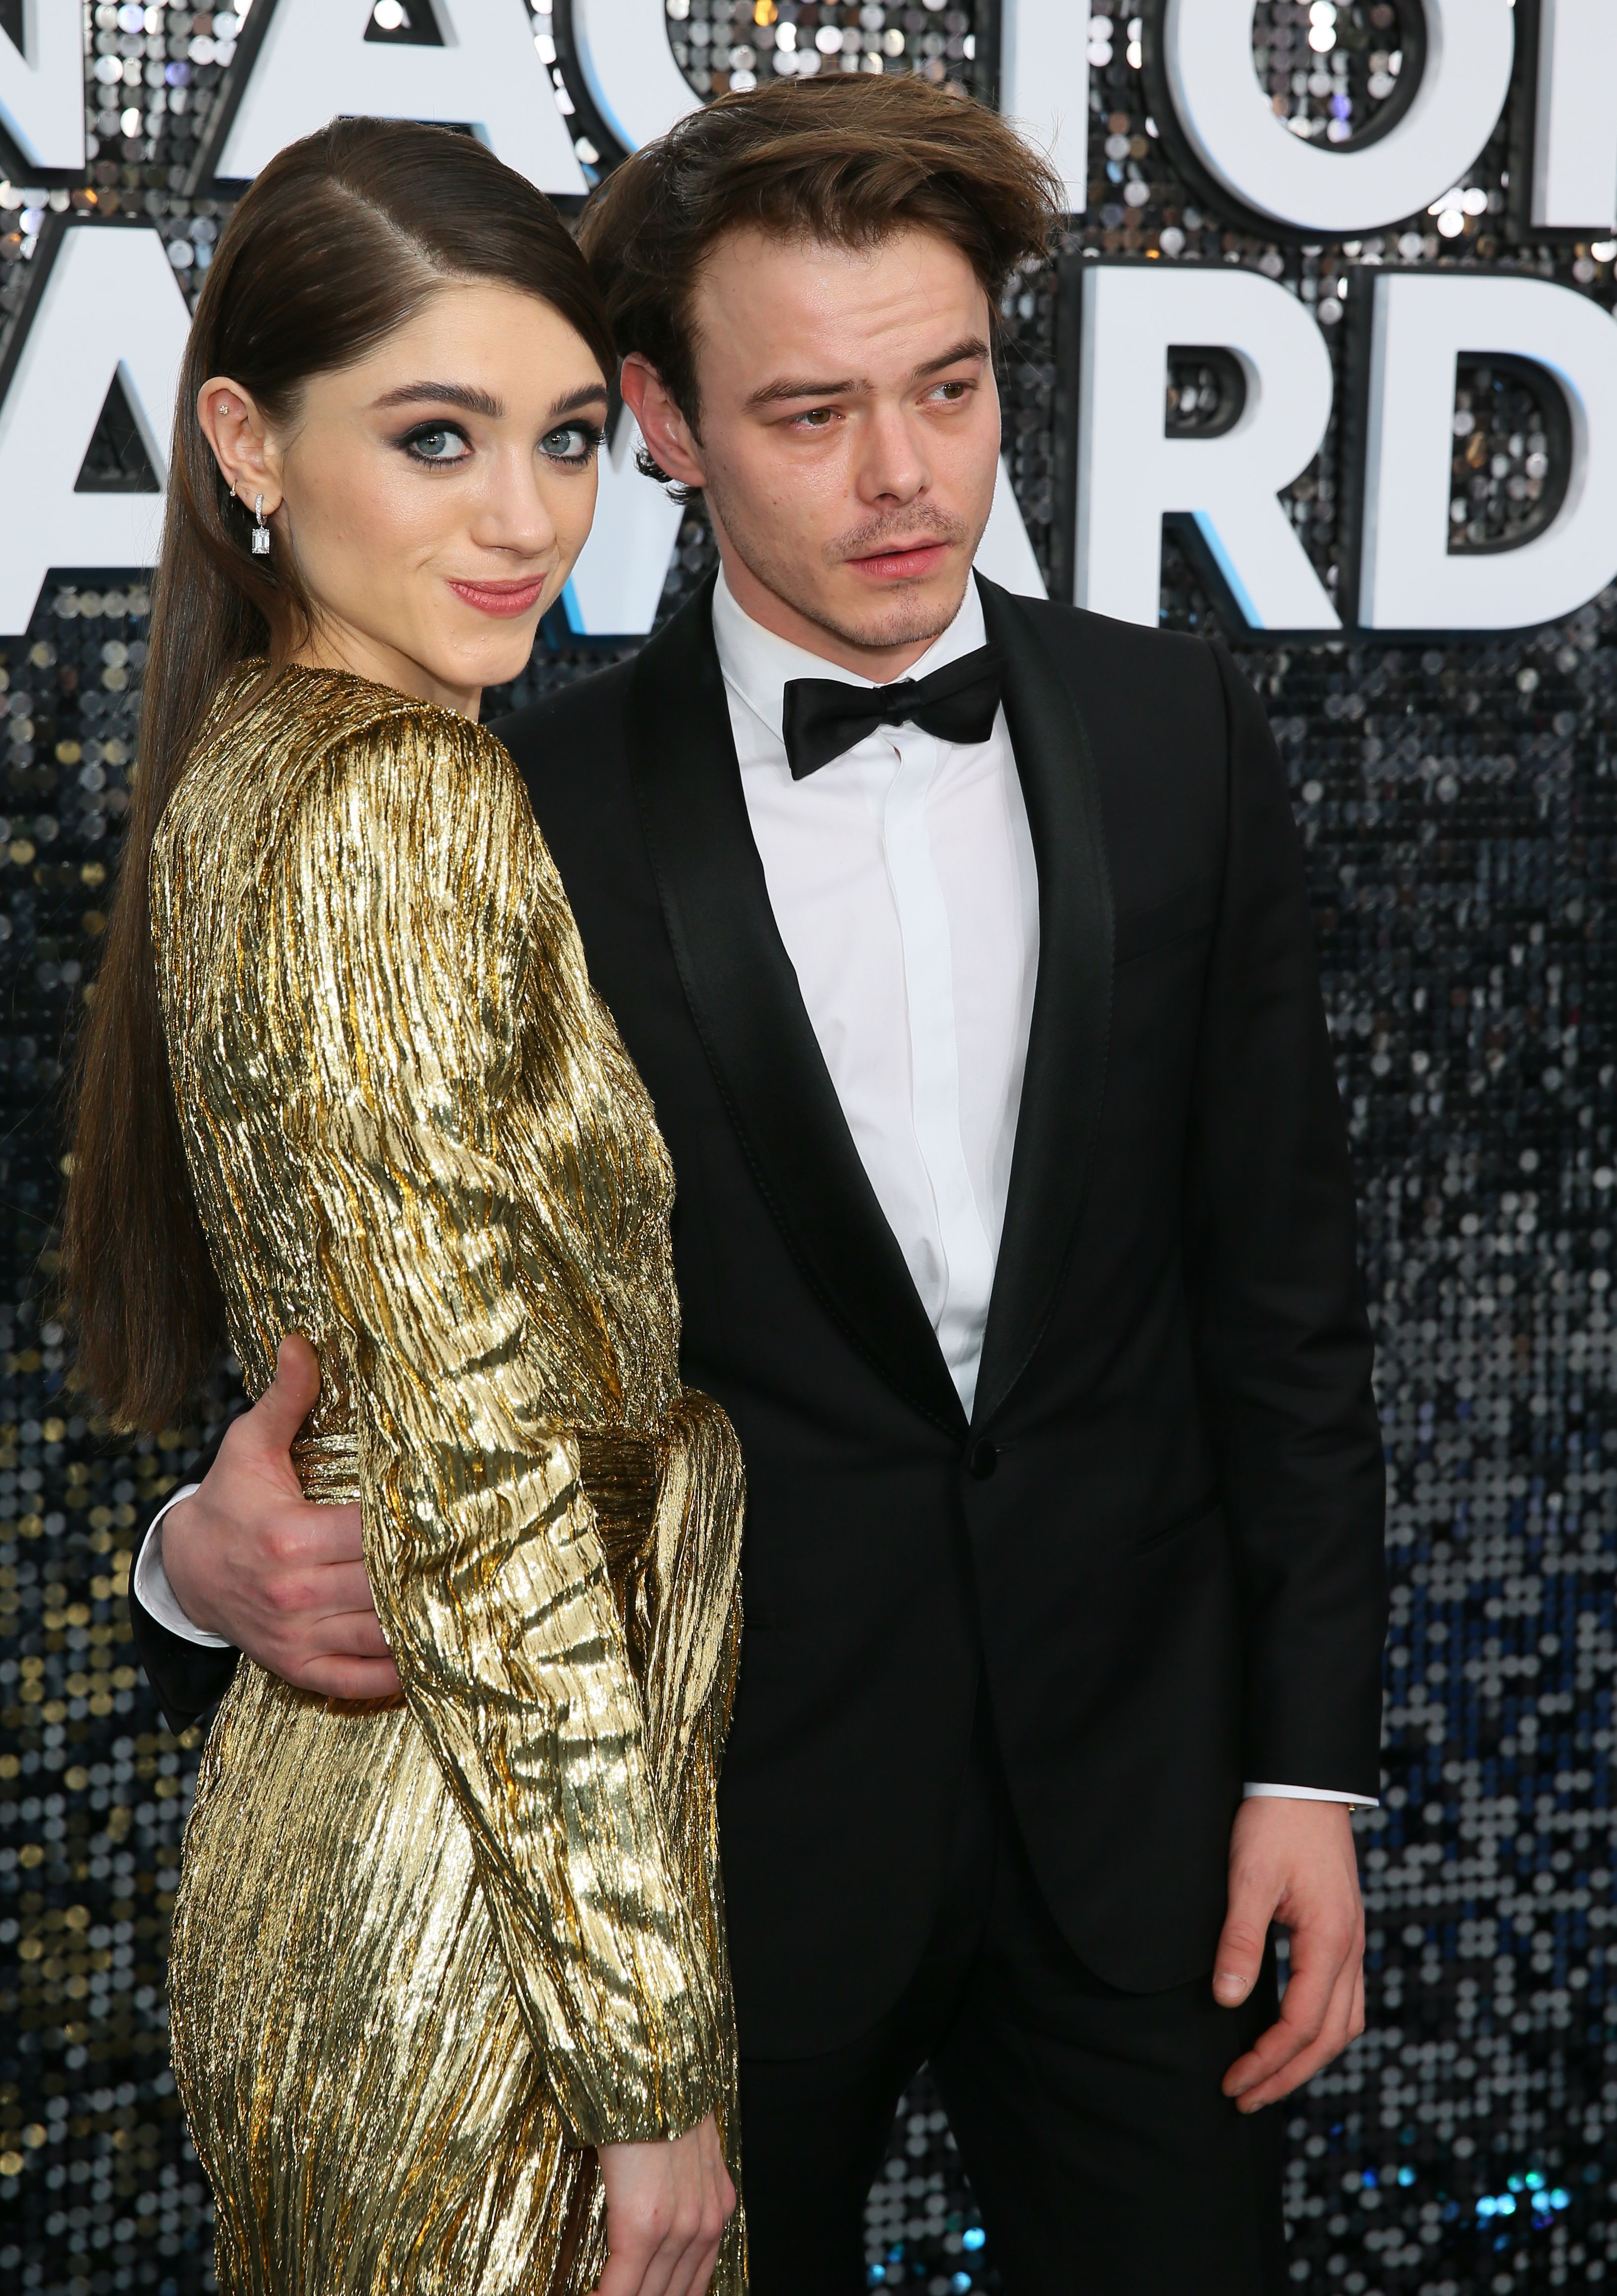 Natalia Dyer And Charles Heaton Show Pda At Screen Actors Guild